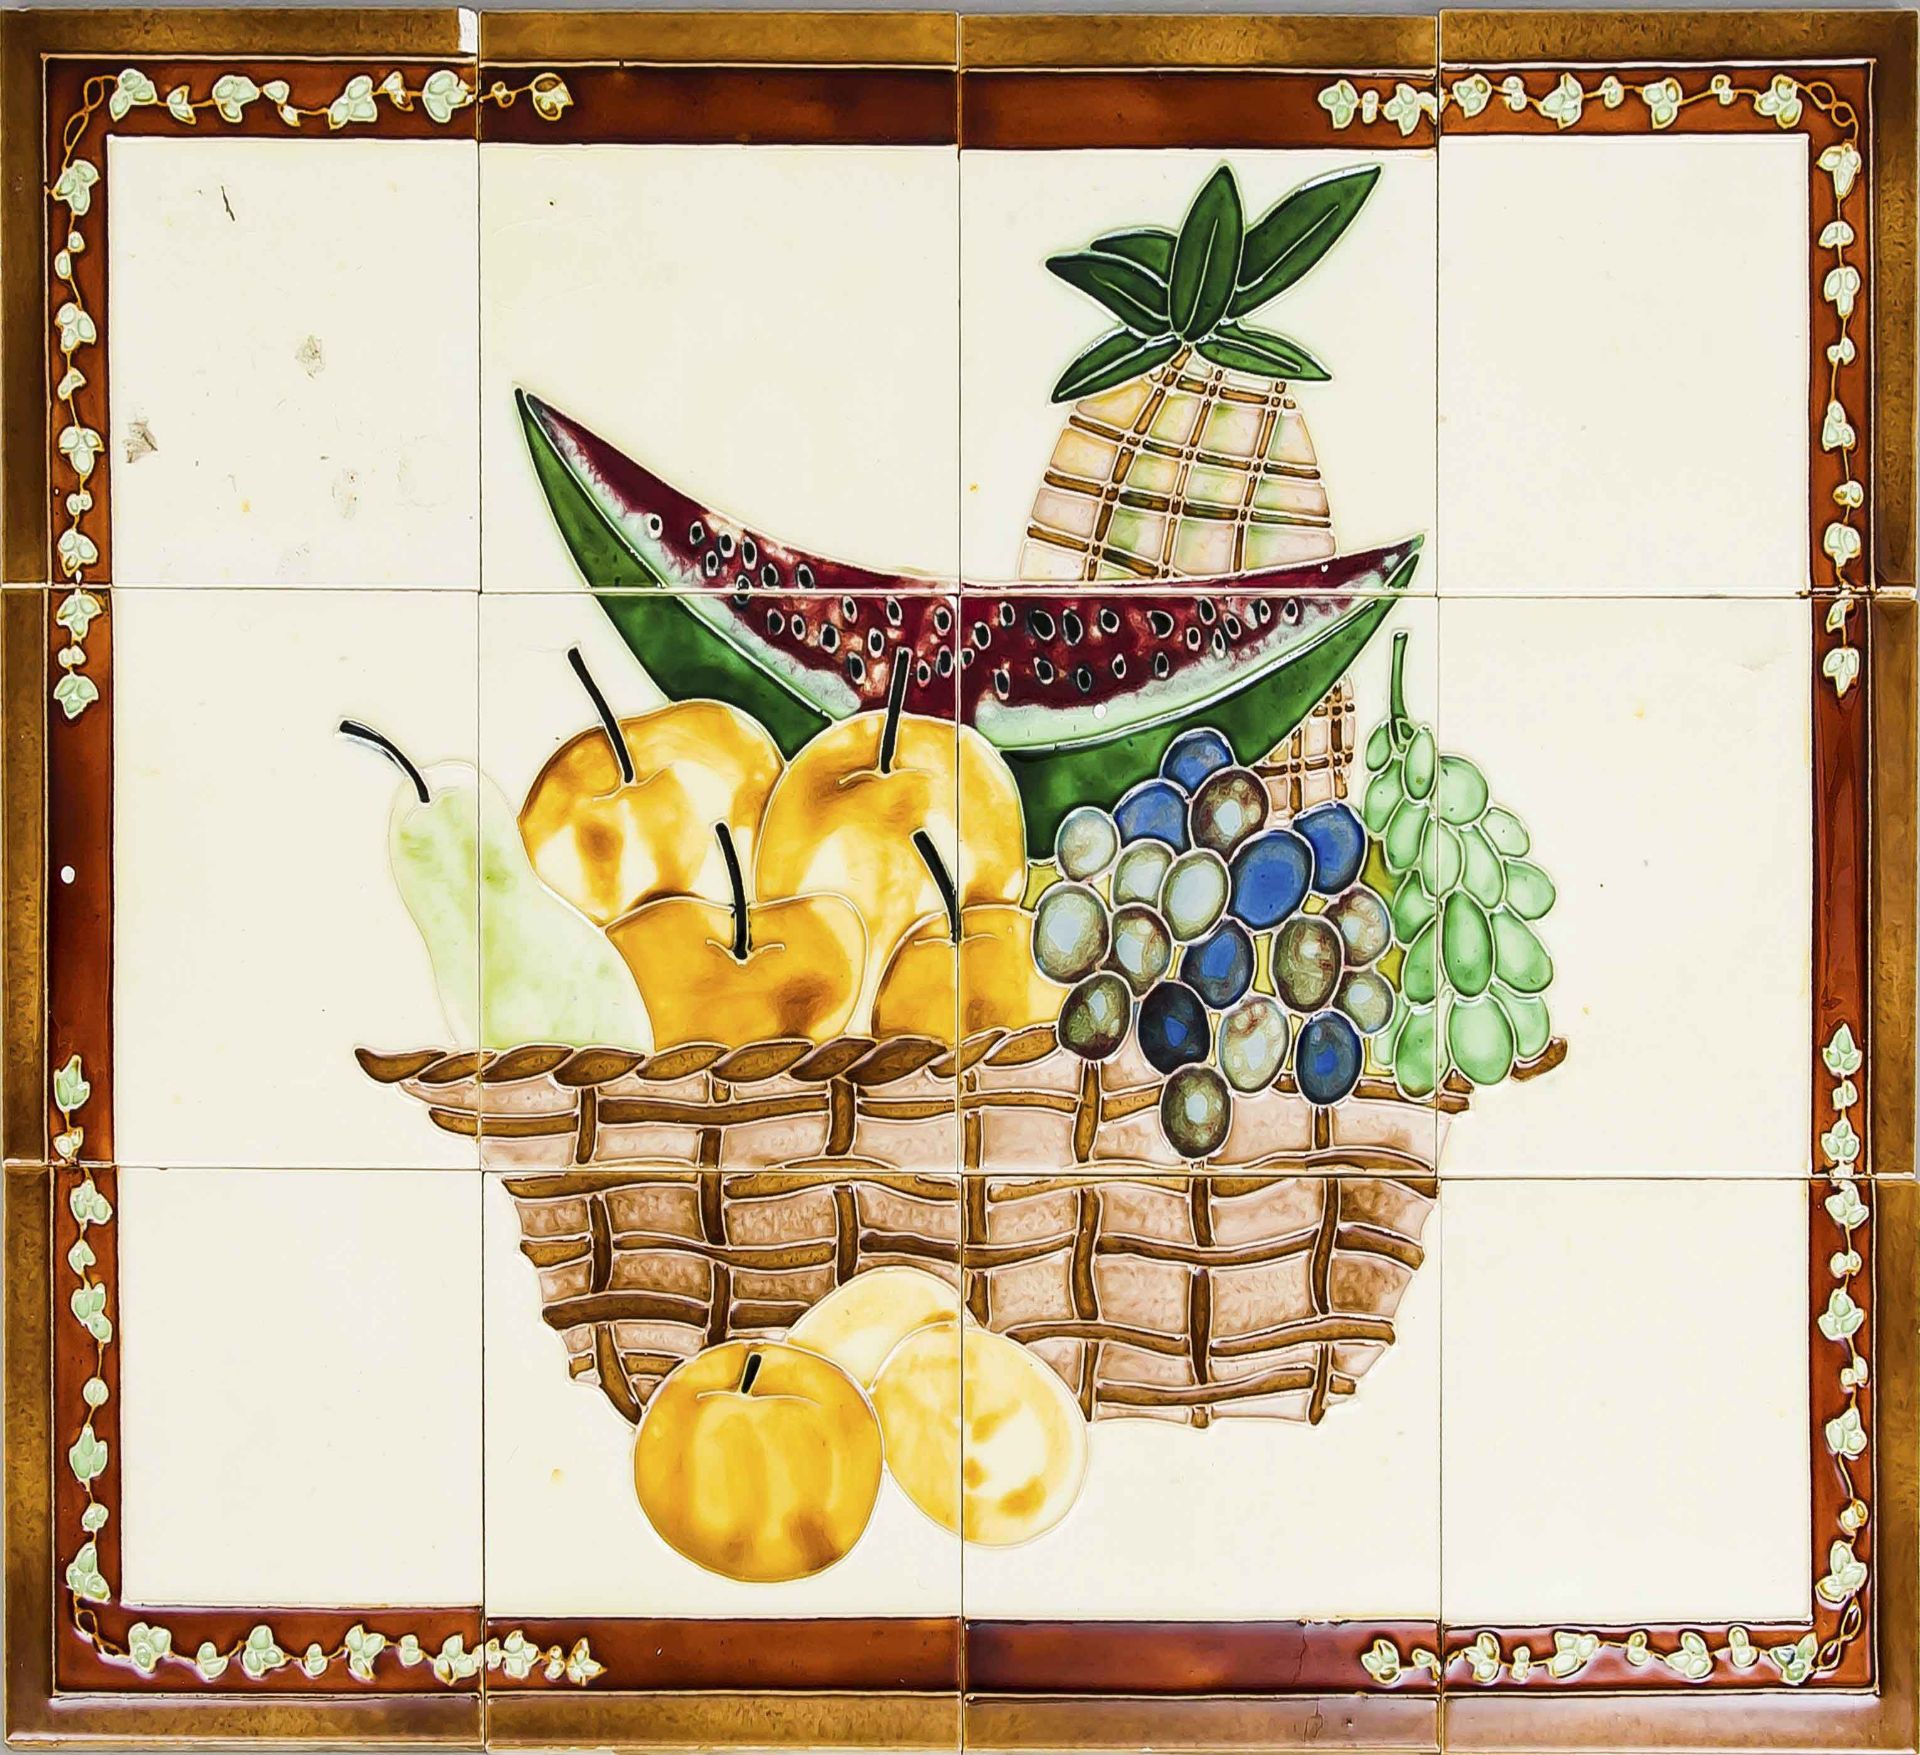 Tile painting Fruit still life, 20th century, made of 12 tiles, polychrome painted, each 15 x 15 cm